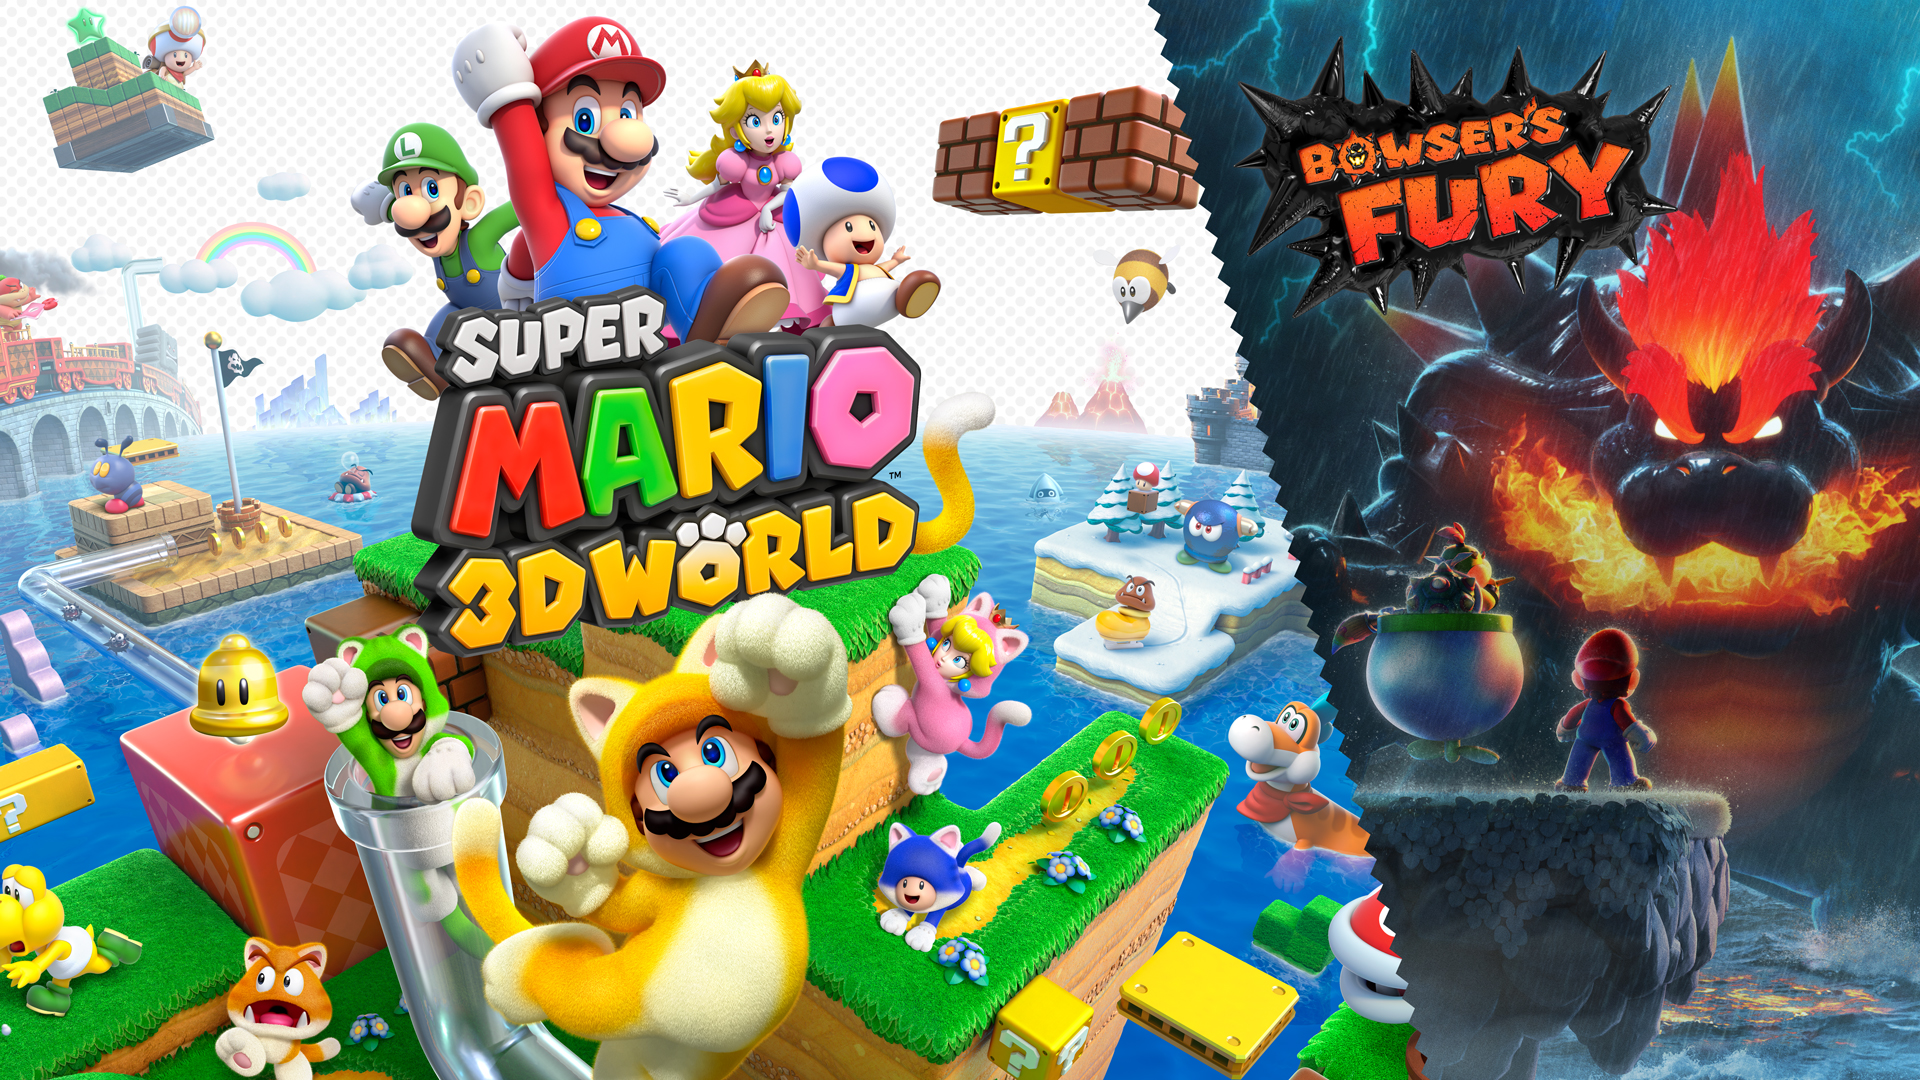 2021 video game releases -  Super Mario 3D World